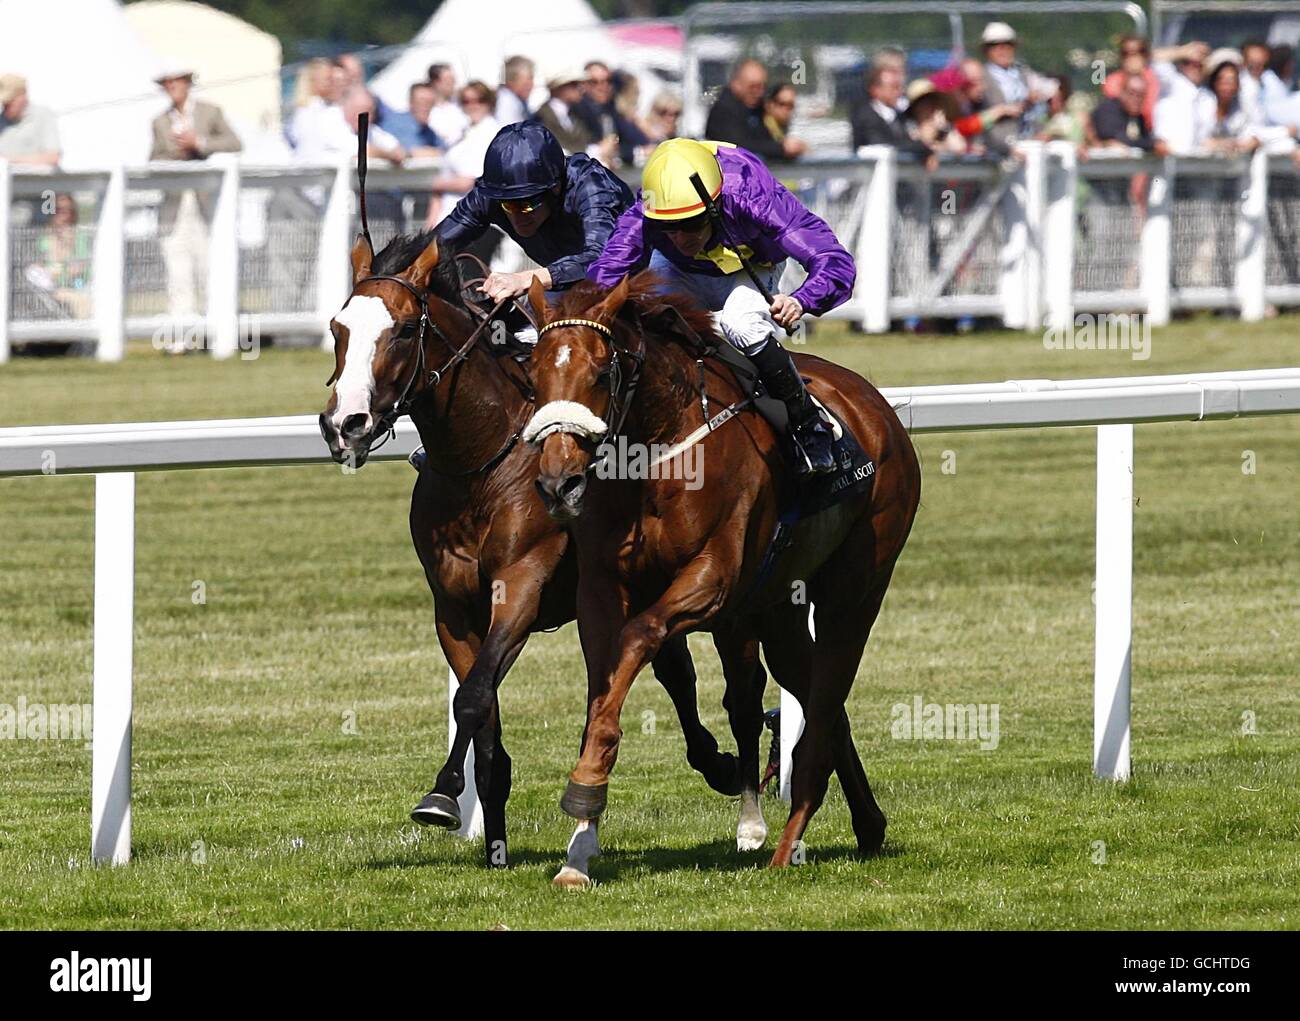 Rite of Passage ridden by Pat Smullen (right) wins the Gold Cup from Age of Aquarius ridden by Johnny Murtagh during Ladies day at Royal Ascot Stock Photo